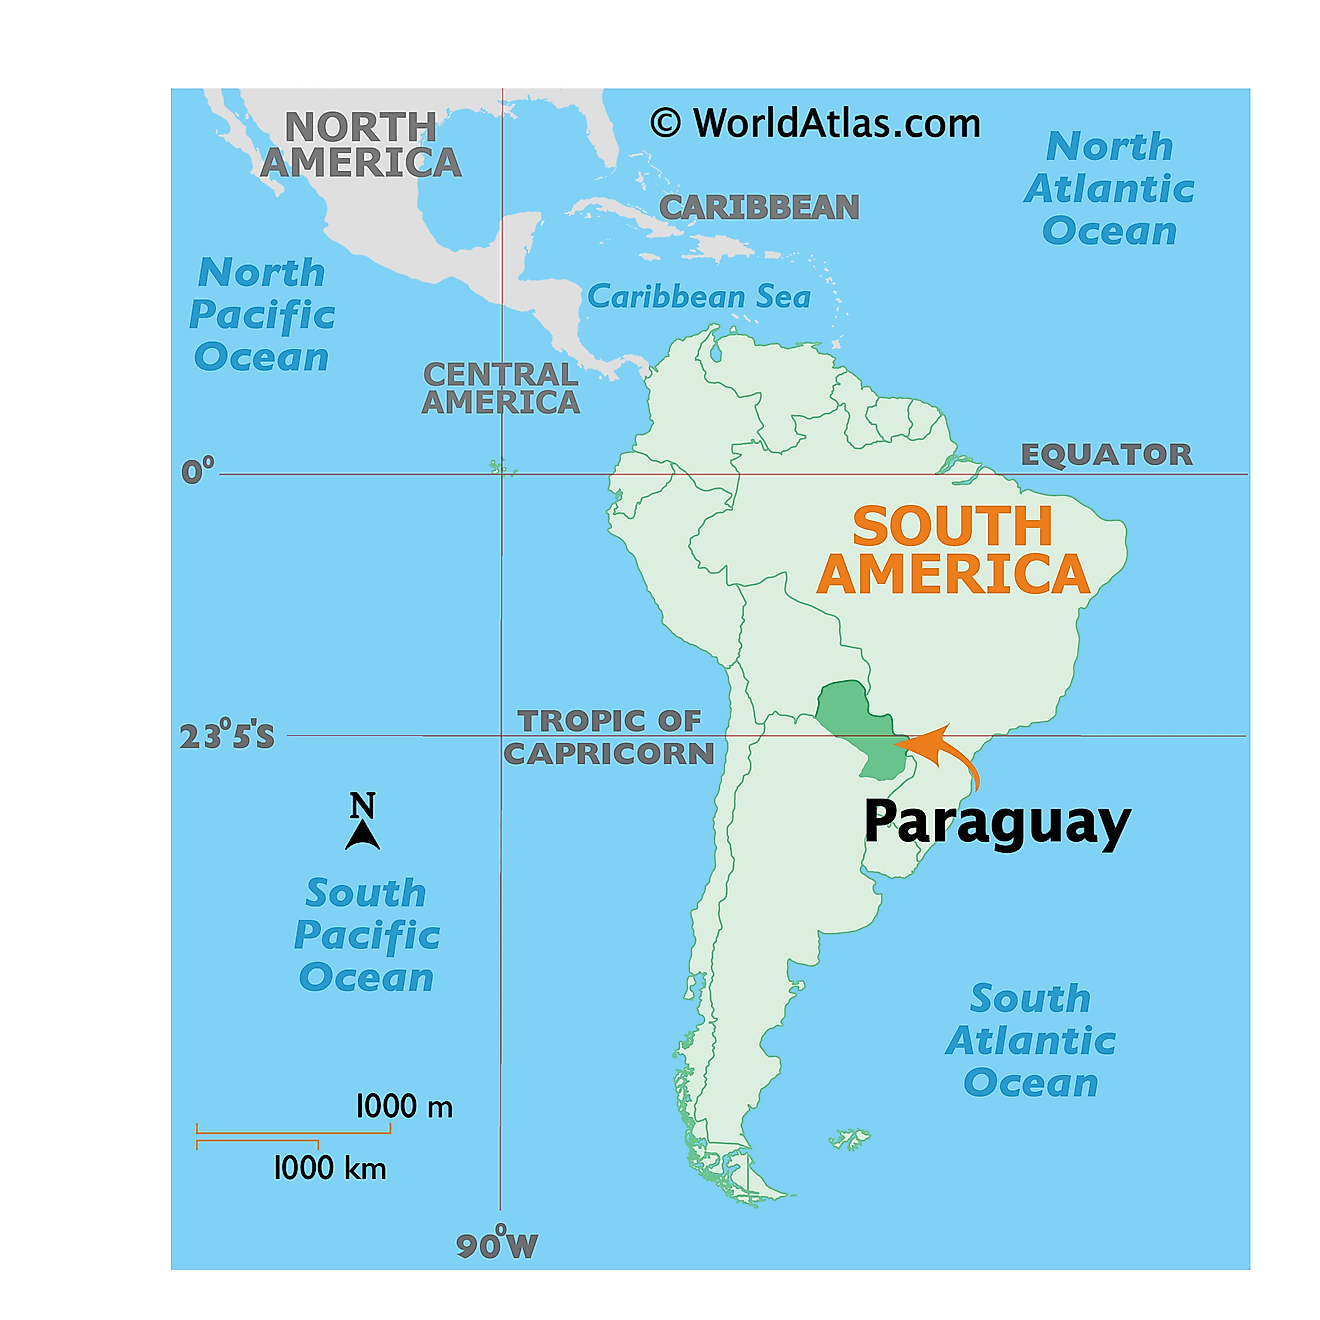 Where is Paraguay?